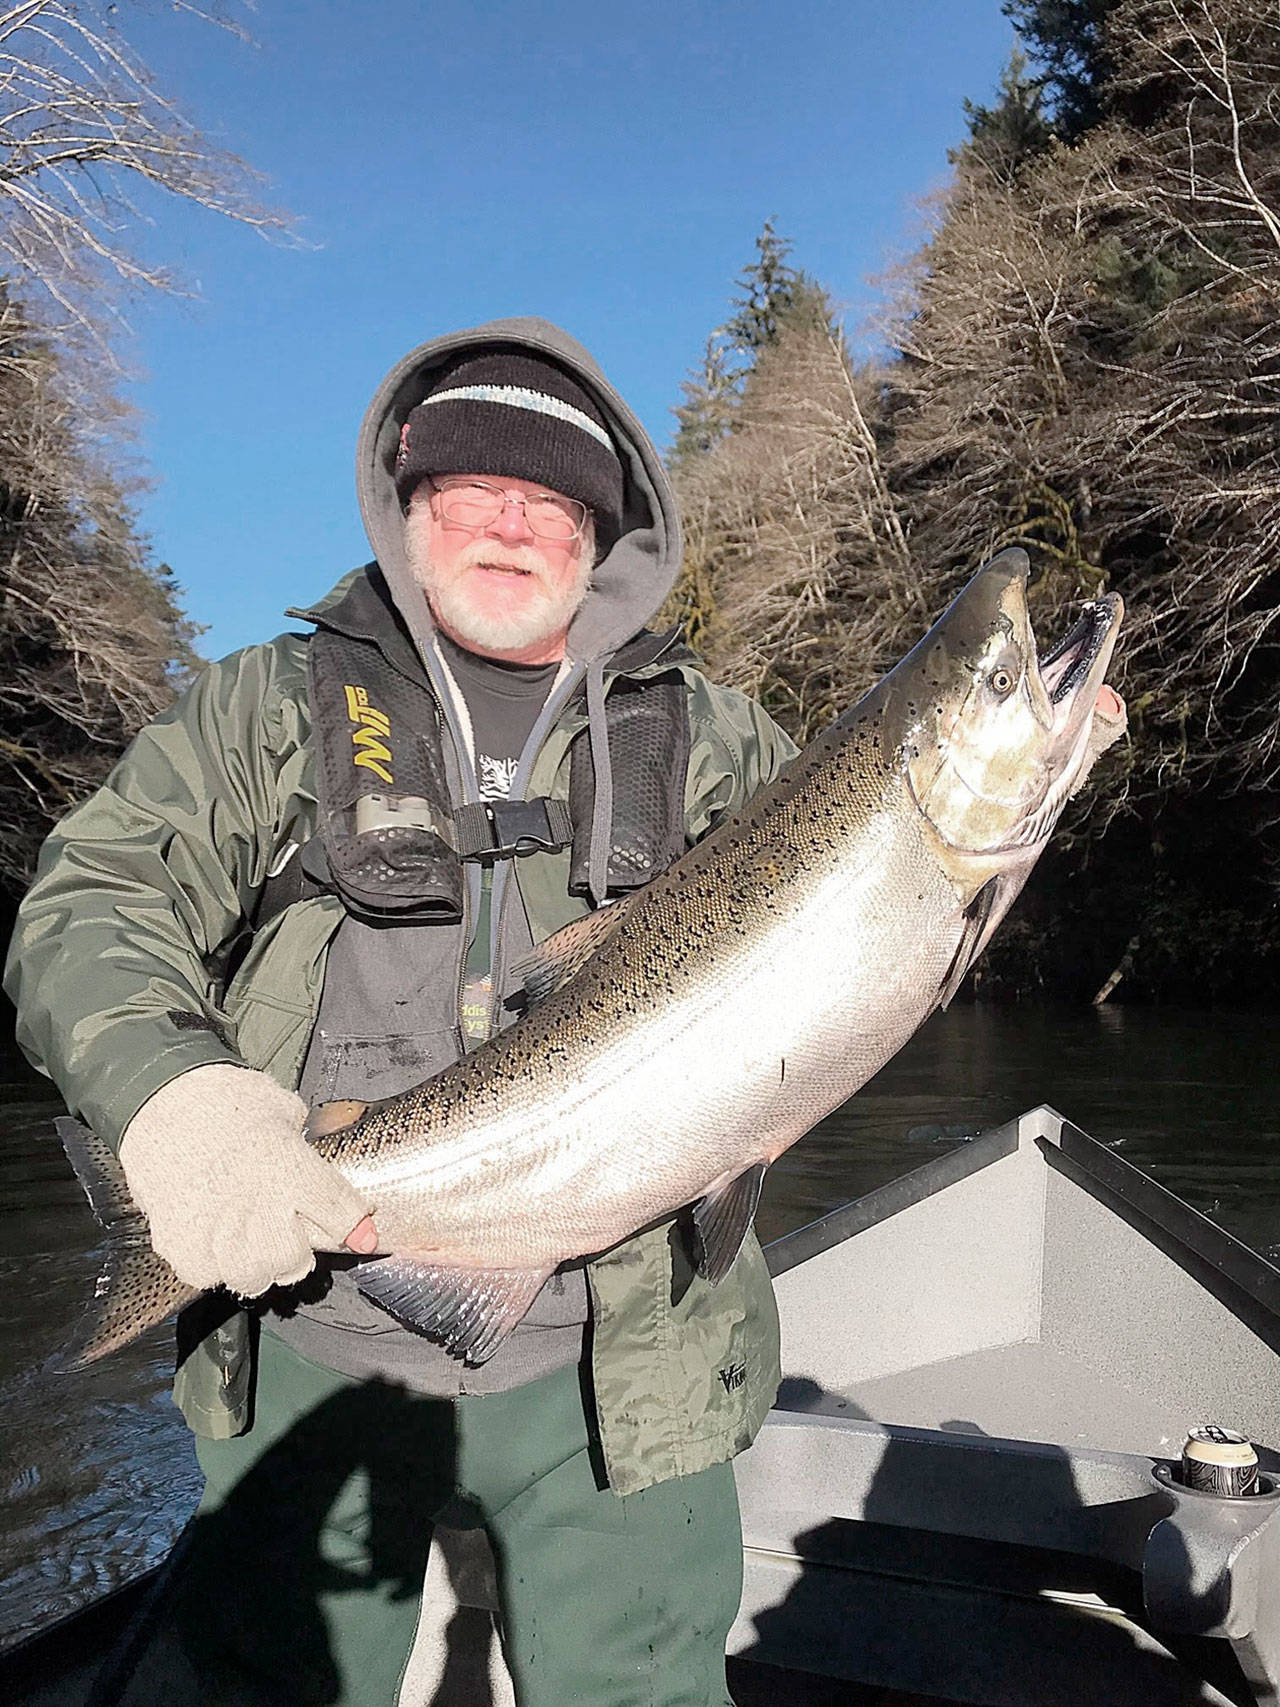 Bob Lashinski caught this chrome king while fishing with Mike Zavadlov of Mike Z’s Guide Service (360-640-8109) earlier this month. With Thanksgiving approaching, West End anglers are keeping watchful eyes out for hatchery steelhead.
Photo/Mike Zavadlov